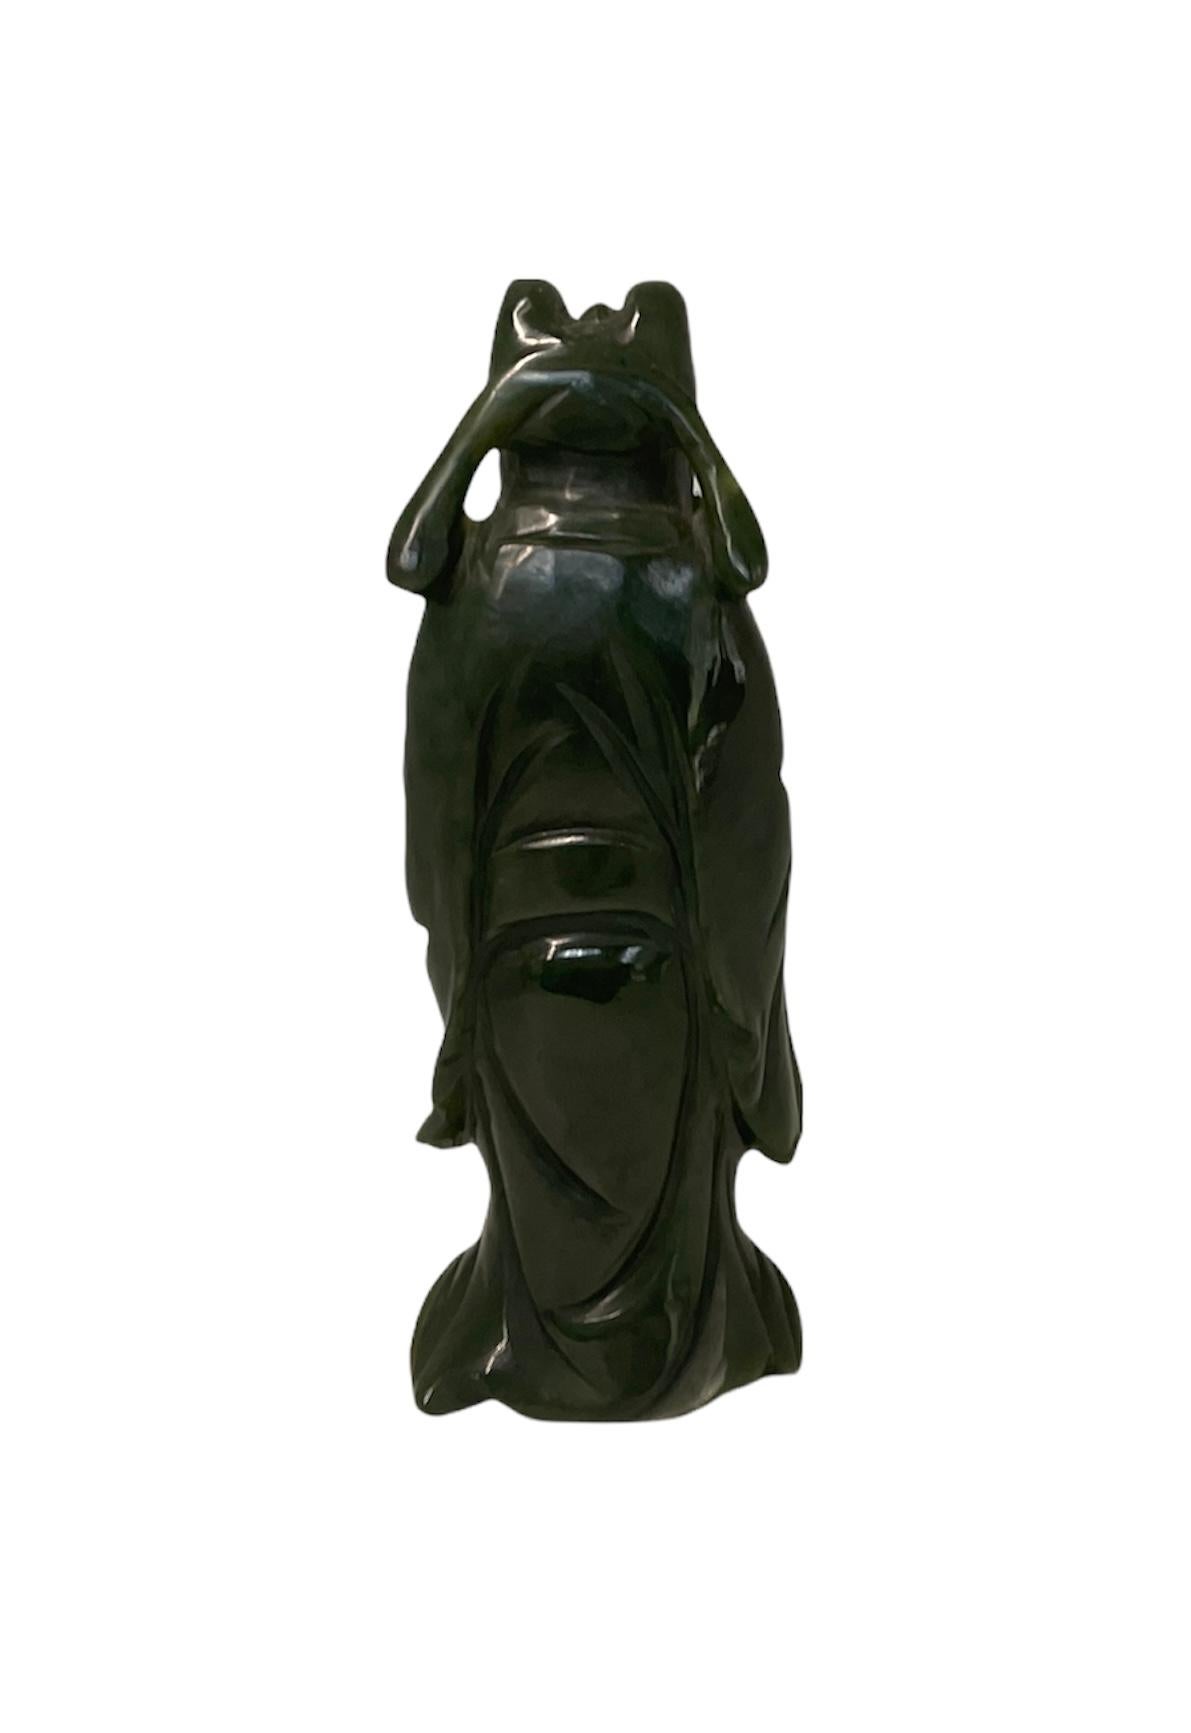 Hand Carved Green Pine Color Jade Small Chinese Wise Man Sculpture/Figurine 5